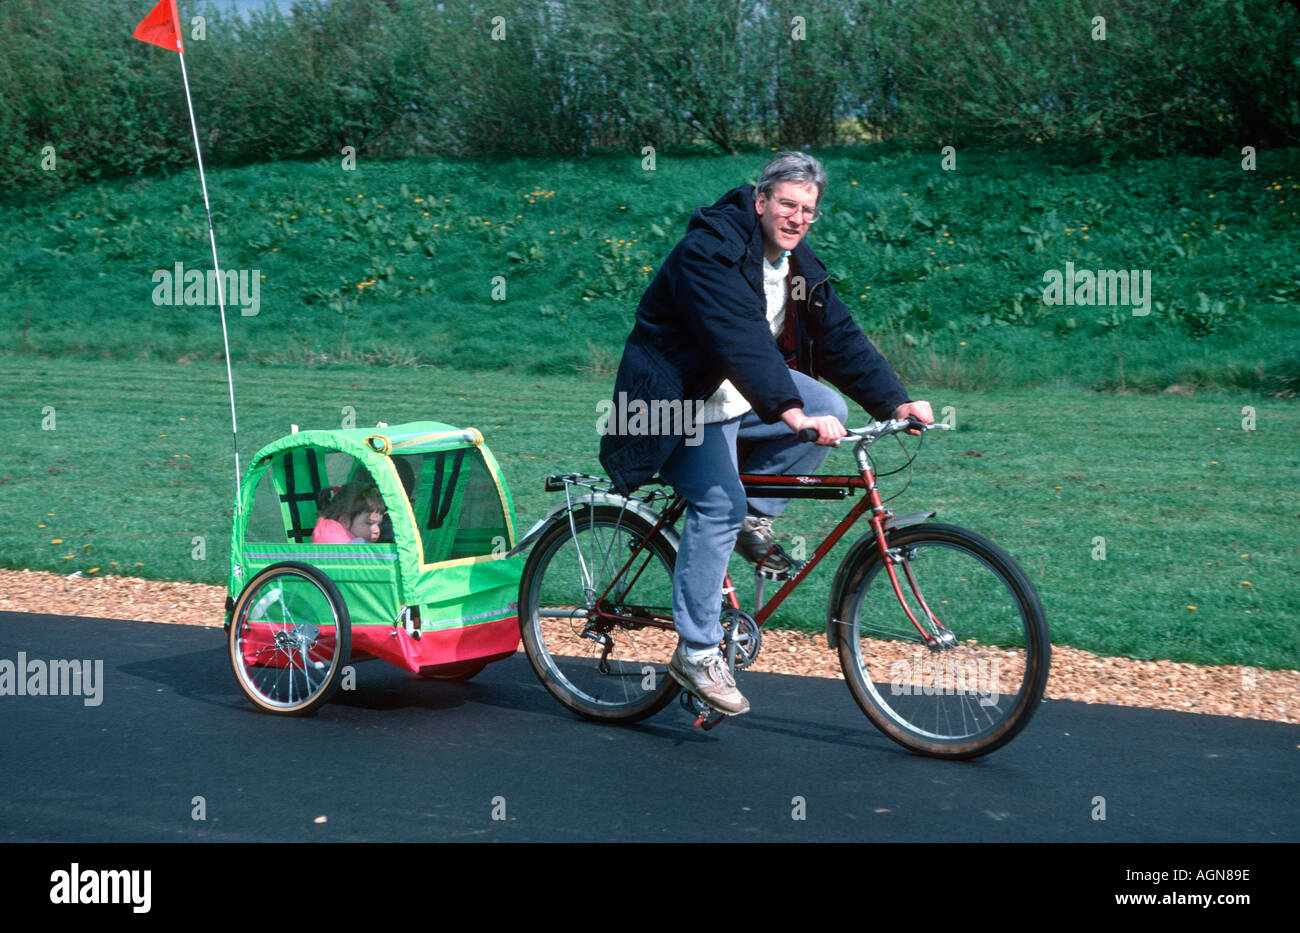 Bicycle with trailer on test at Ryton Gardens at AGM of Ecology Building Society UK Stock Photo